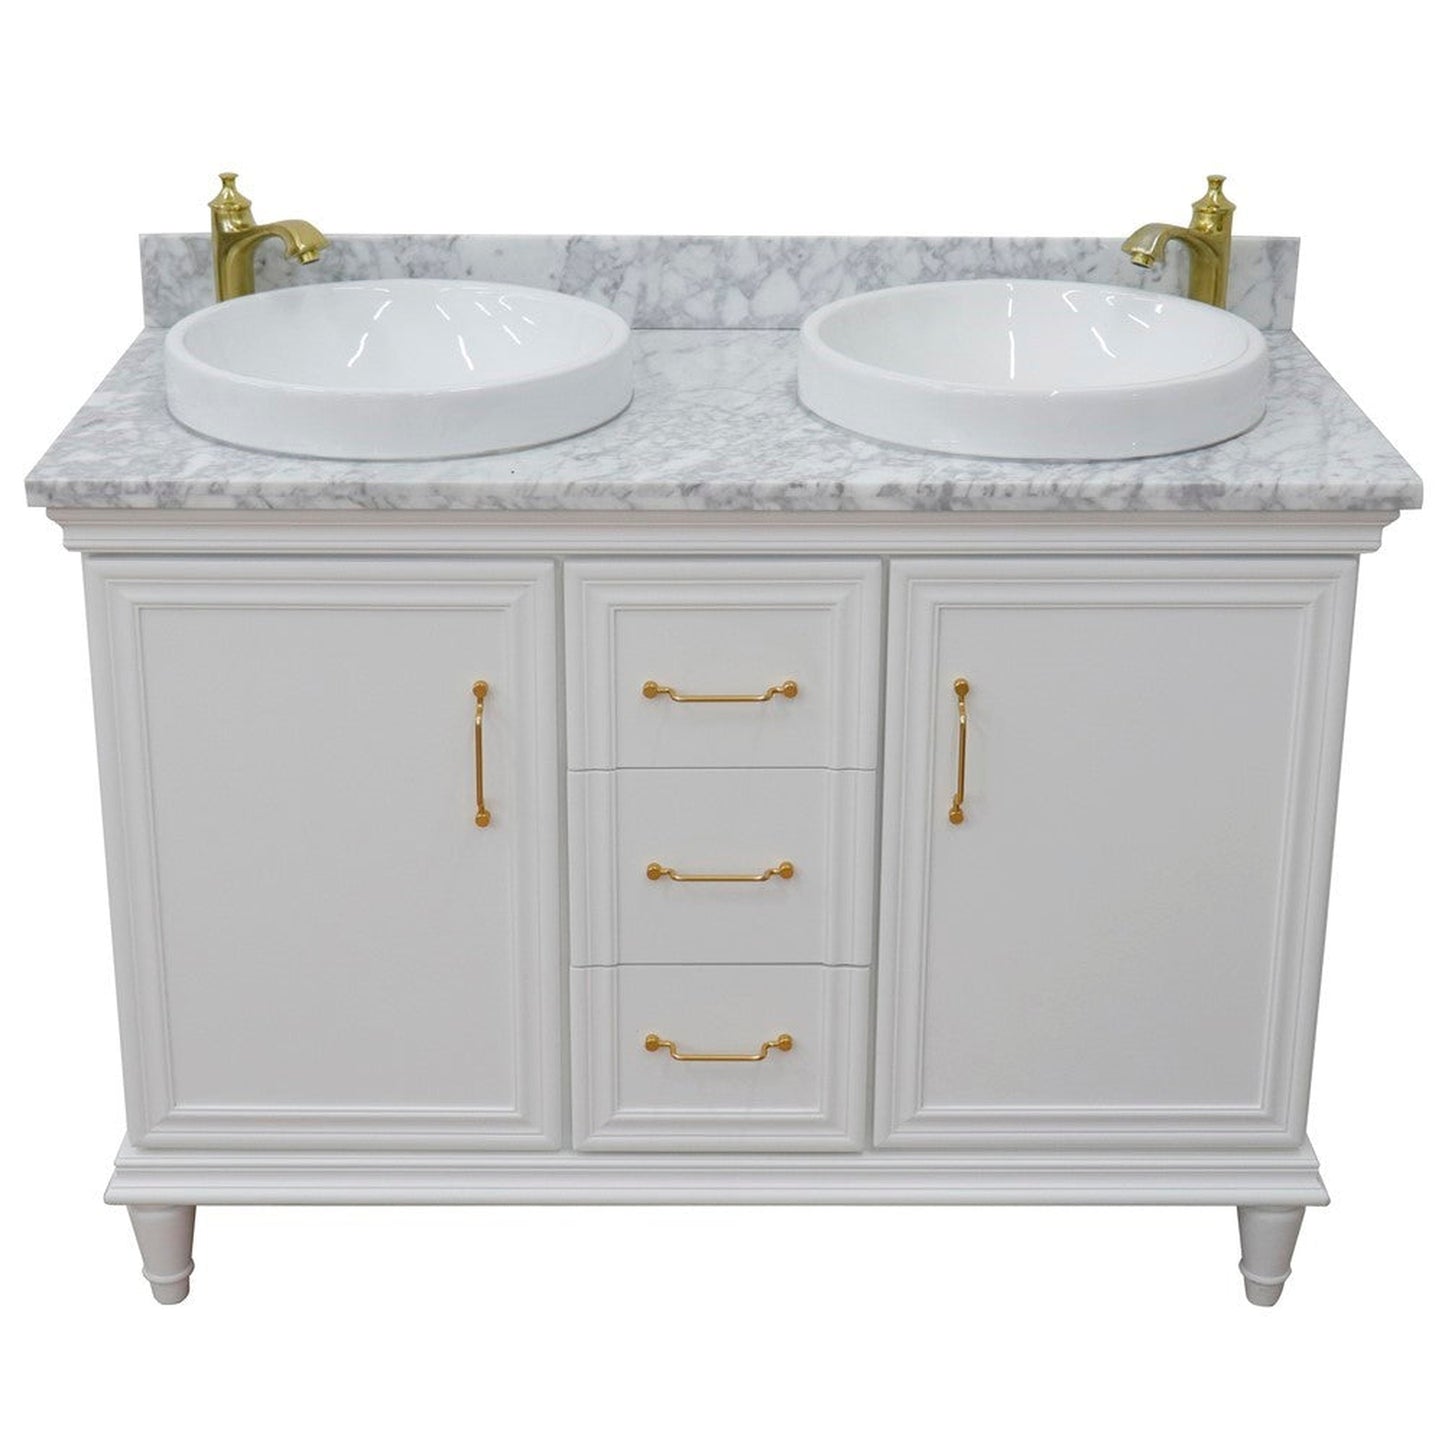 Bellaterra Home Forli 49" 2-Door 3-Drawer White Freestanding Vanity Set With Ceramic Double Vessel Sink and White Carrara Marble Top